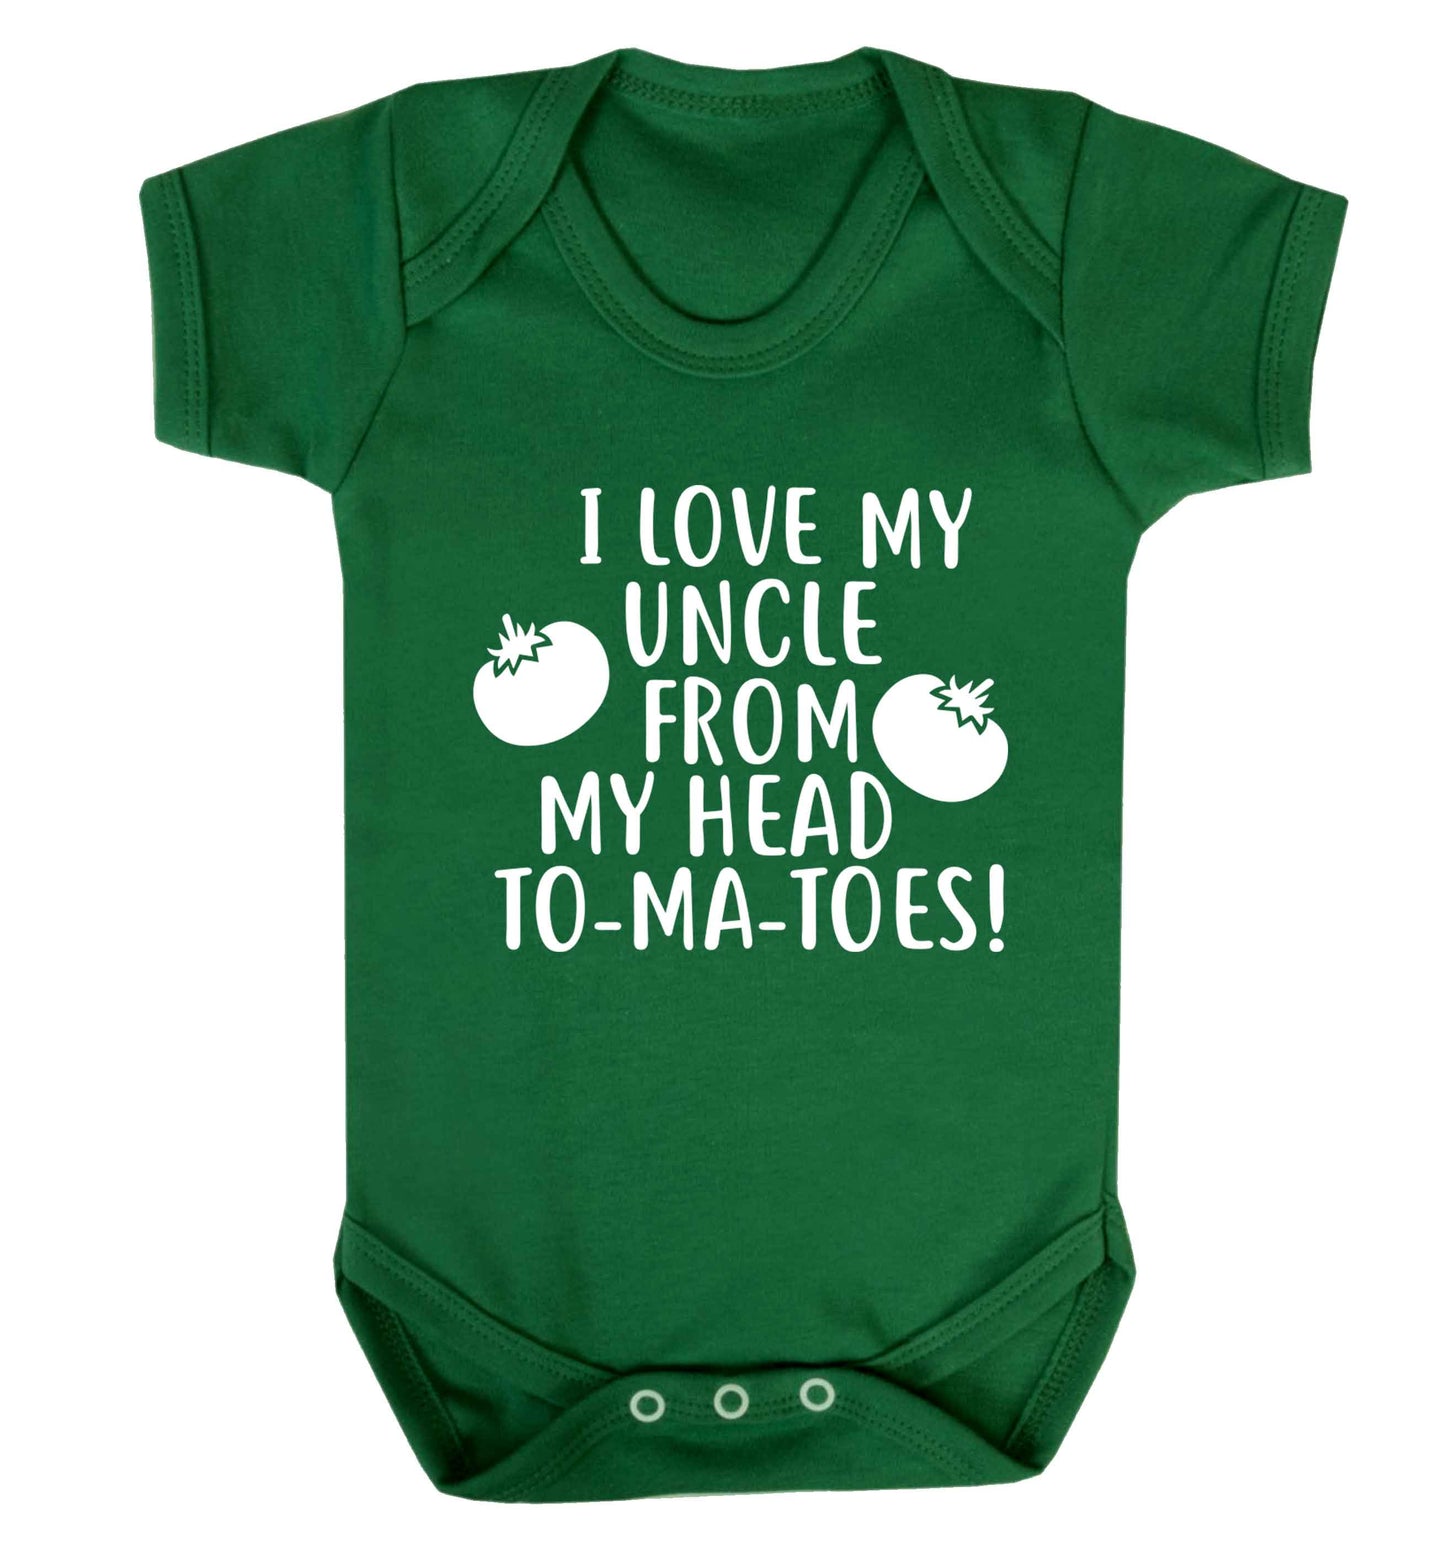 I love my uncle from my head To-Ma-Toes Baby Vest green 18-24 months